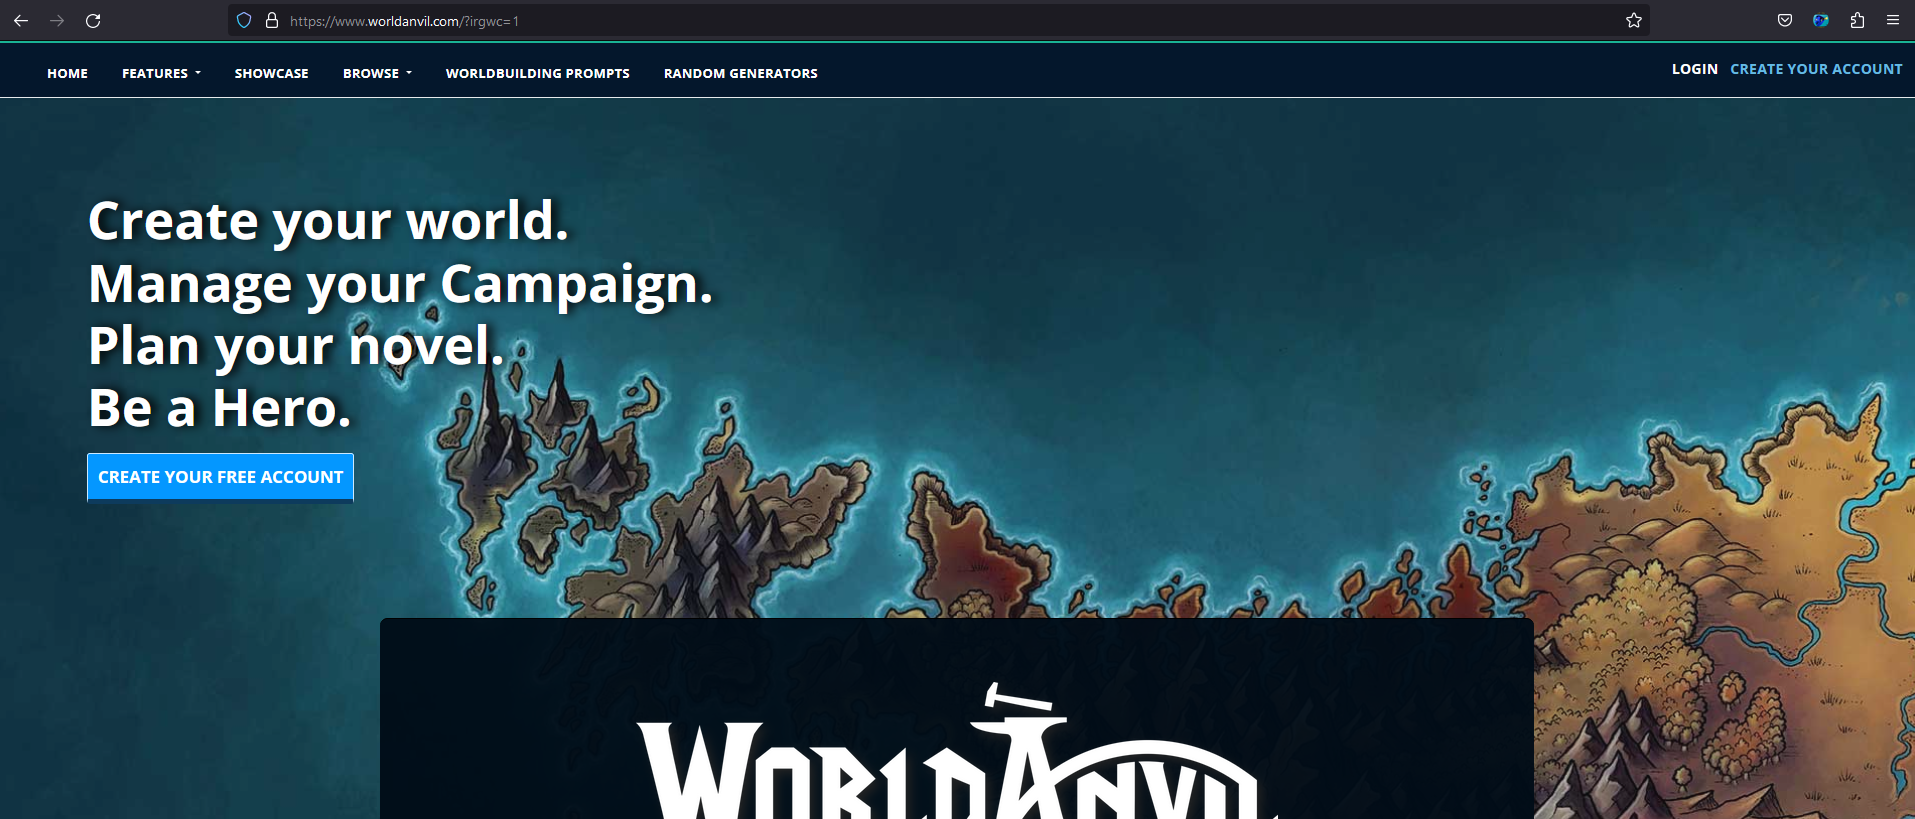 screenshot of World Anvil homepage showing the button to sign up for an account